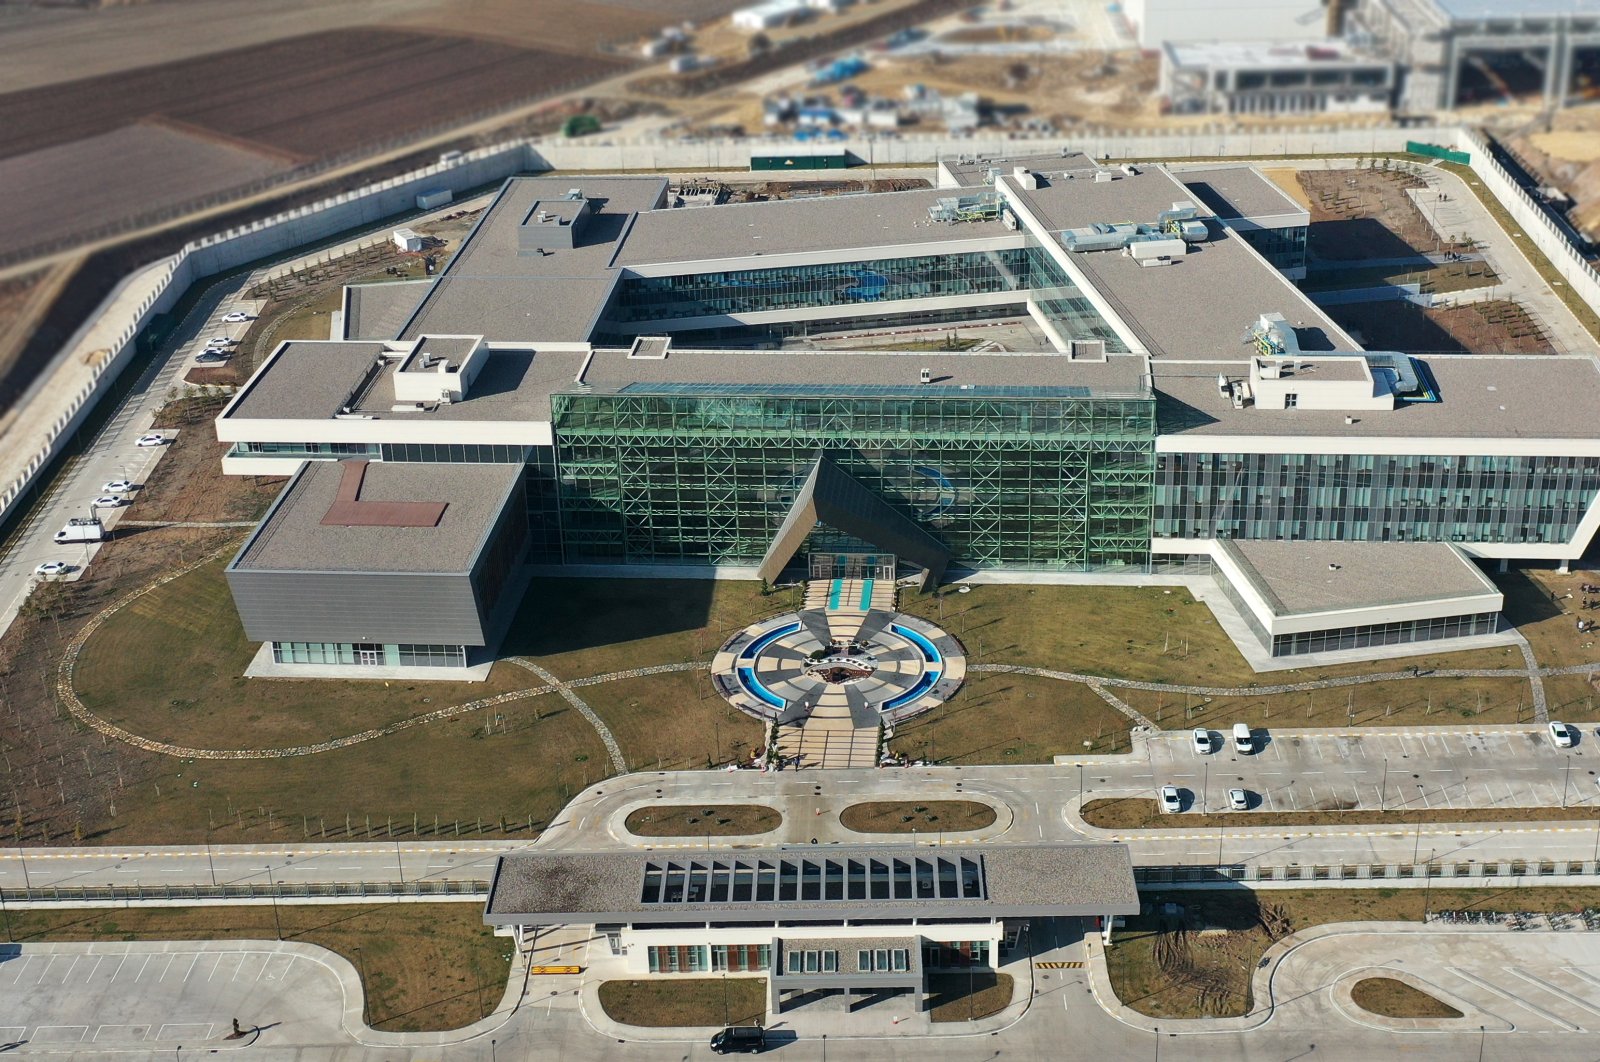 An aerial view of the TAI&#039;s MMU Engineering Center and the Composite Production Building, Ankara, Turkey, Jan. 5, 2022. (Courtesy of the Presidency of Defense Industries)